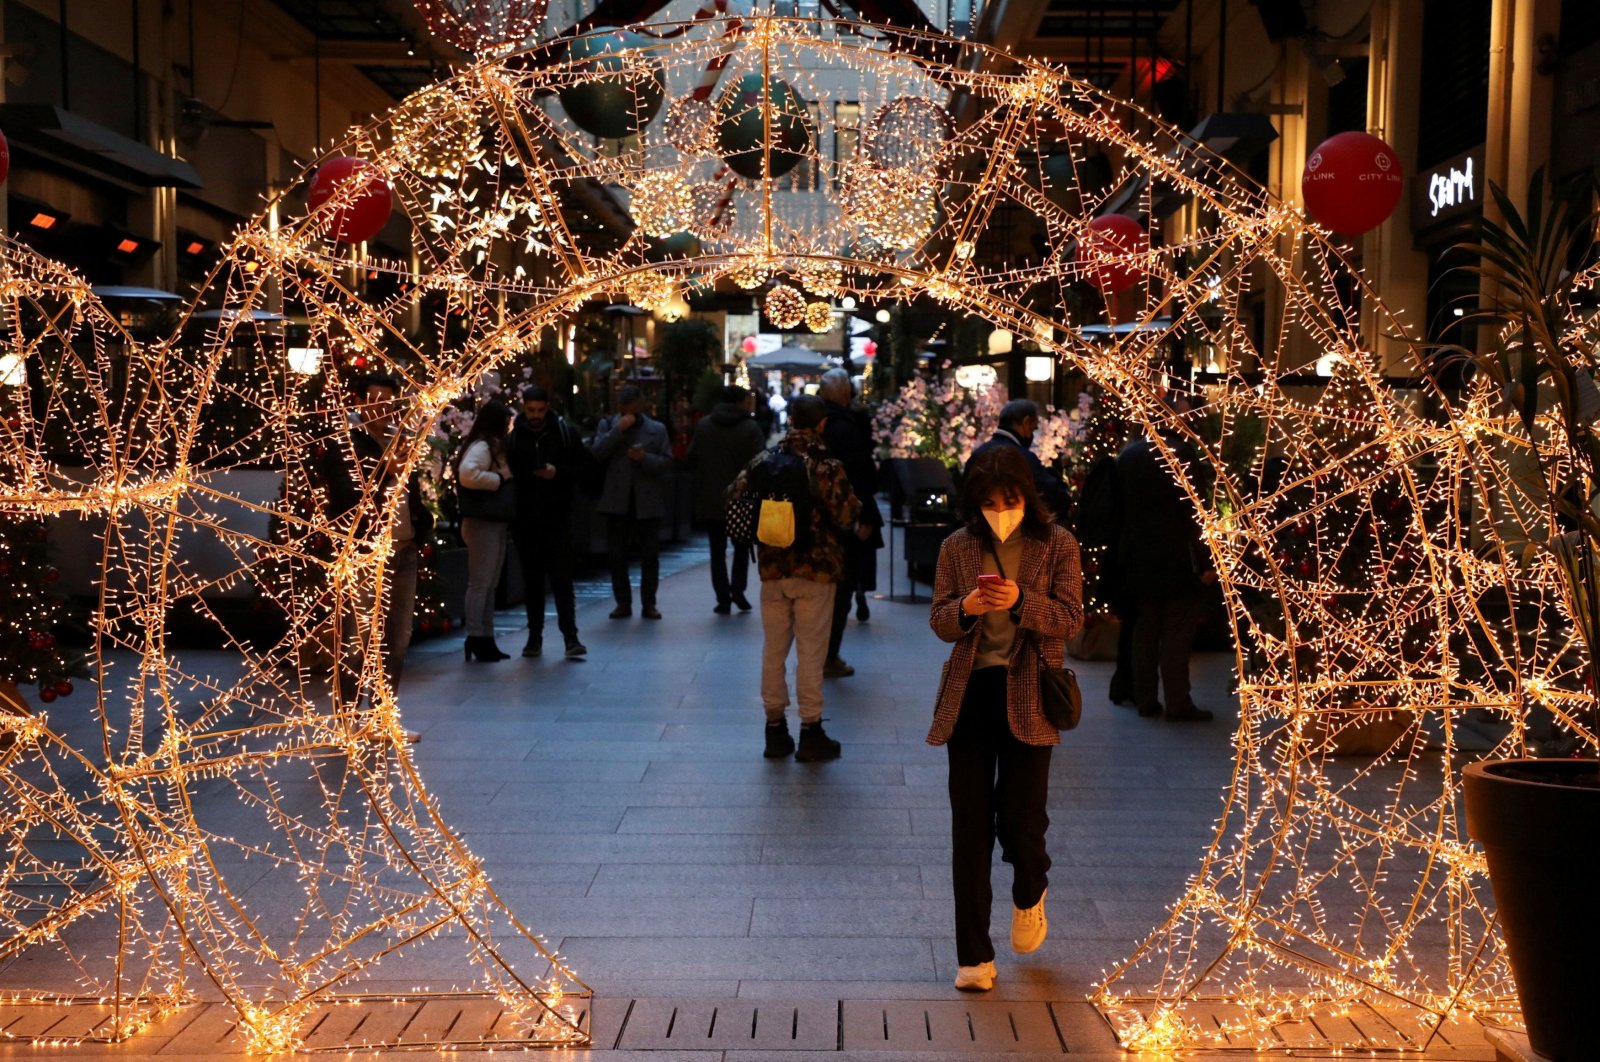 A person wearing a protective face mask makes her way through Christmas decorations as Greece bans public Christmas and New Year&#039;s Eve festivities and mandates mask-wearing in open spaces to help curb the spread of the omicron coronavirus variant, in Athens, Greece, Dec. 23, 2021. (Reuters Photo)